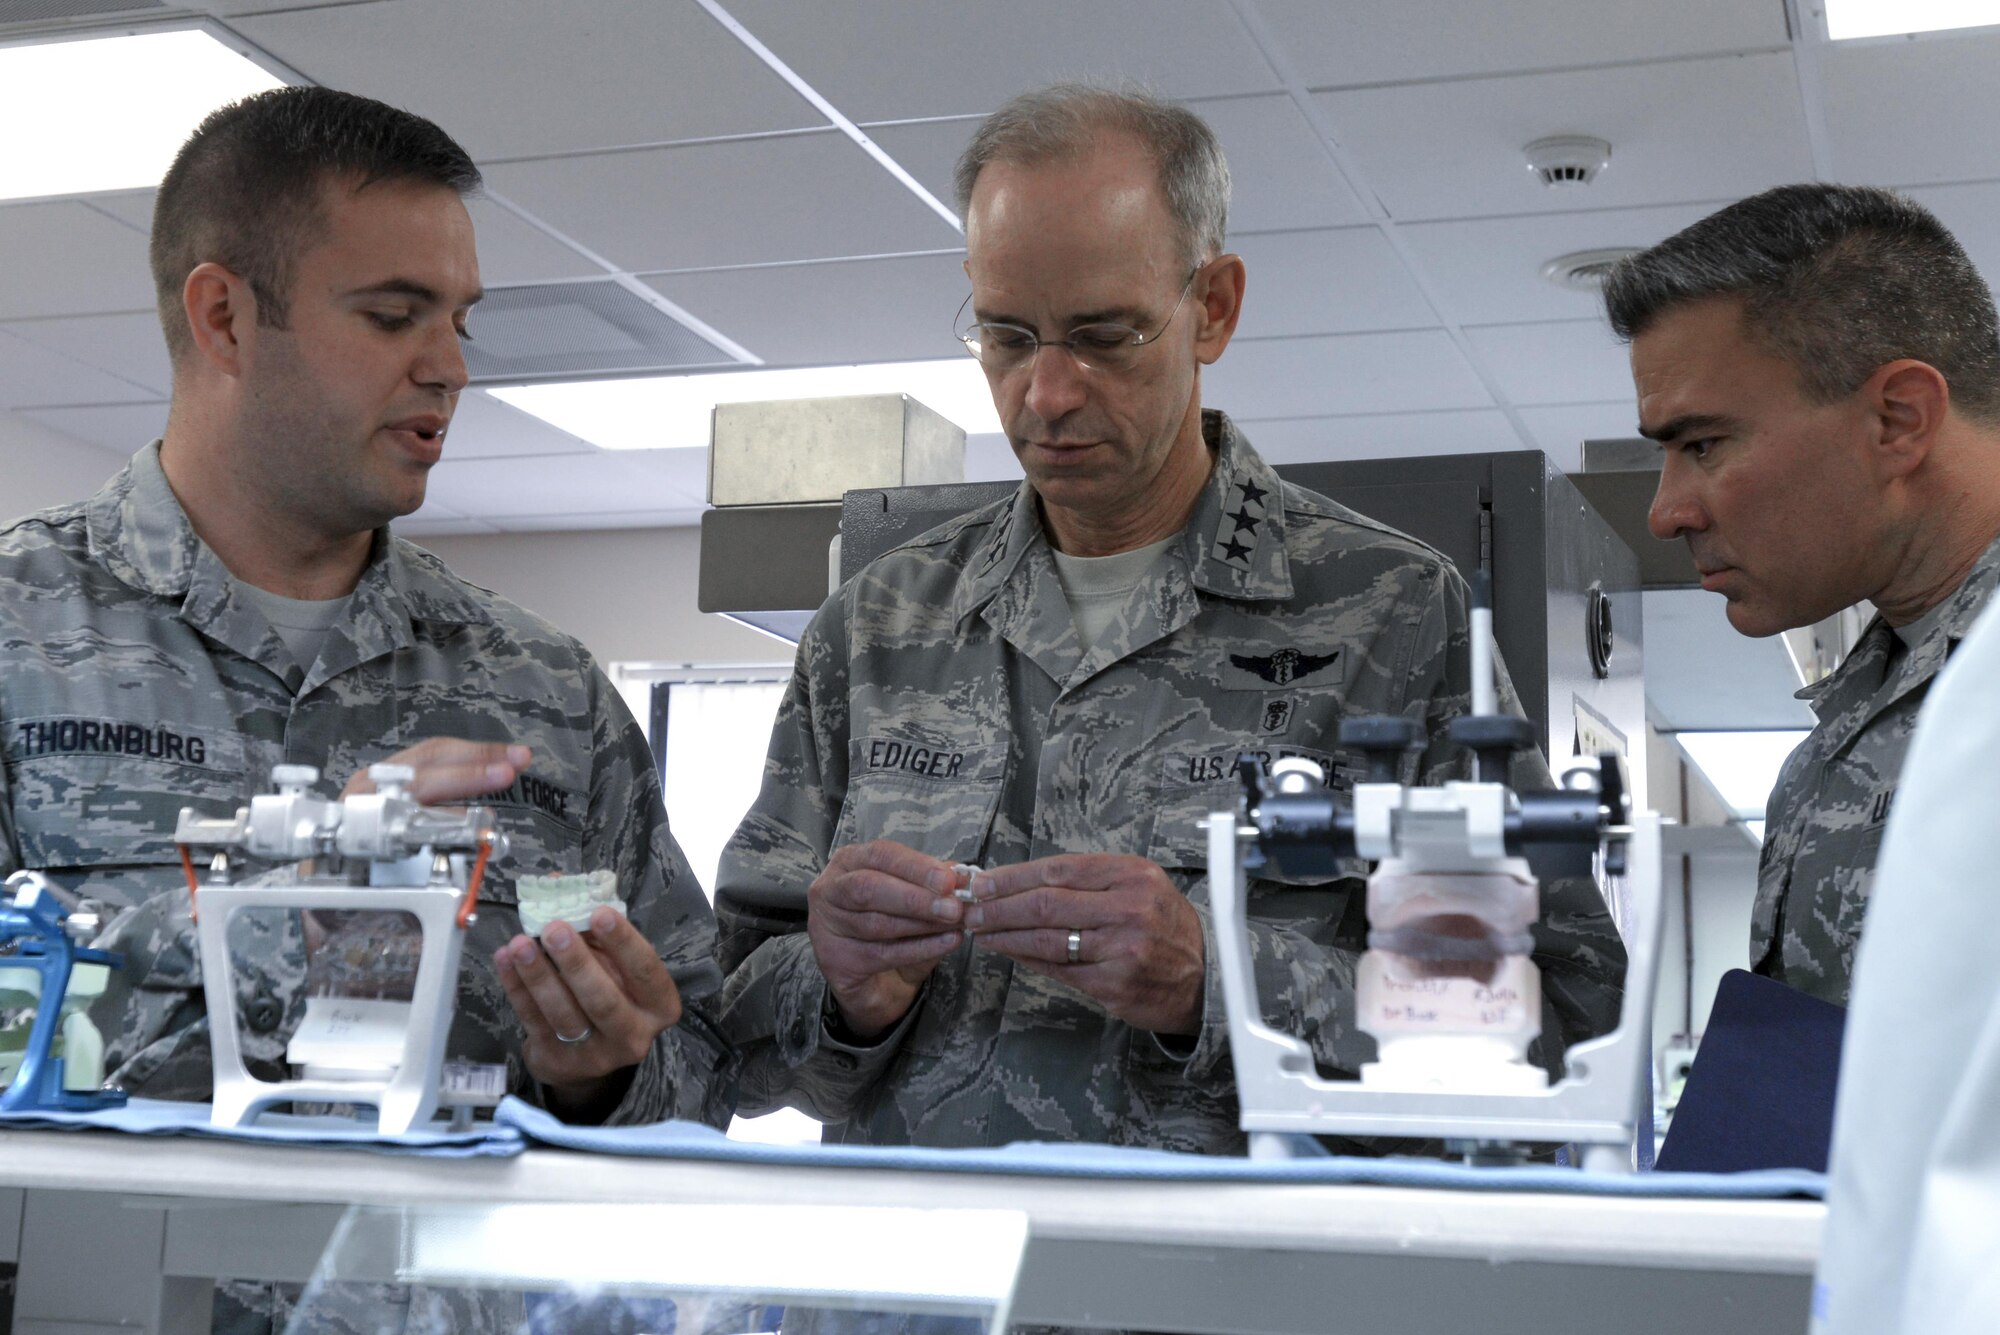 U.S. Air Force Lt. Gen. Mark A. Ediger, middle, Surgeon General of the Air Force, and Chief Master Sgt. Jason E. Pace, right, Chief, Medical Enlisted Force, examine dental equipment at the 48th Dental Squadron dental lab at Royal Air Force Lakenheath, England, July 25. Ediger and Pace visited many of the 48th Medical Group’s facilities during their tour to engage with Airmen and see first-hand the capabilities of Liberty medics. (U.S. Air Force Photo by Airman Eli Chevalier)